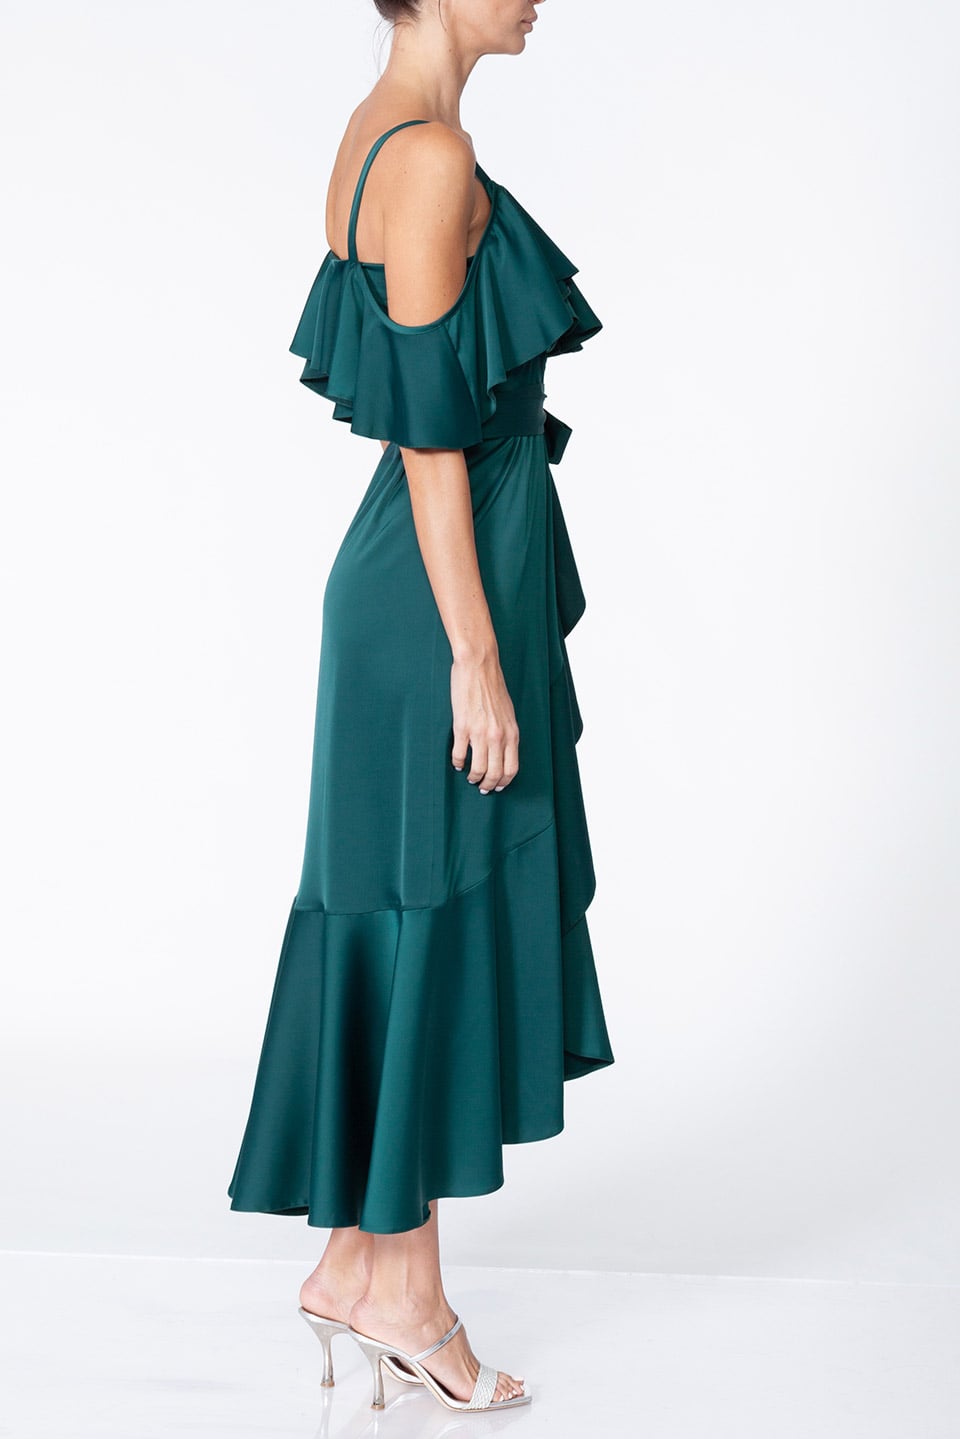 Thumbnail for Product gallery 7, Anze fashion designer's Thea midi dress in Eemerald color, right side full-body view